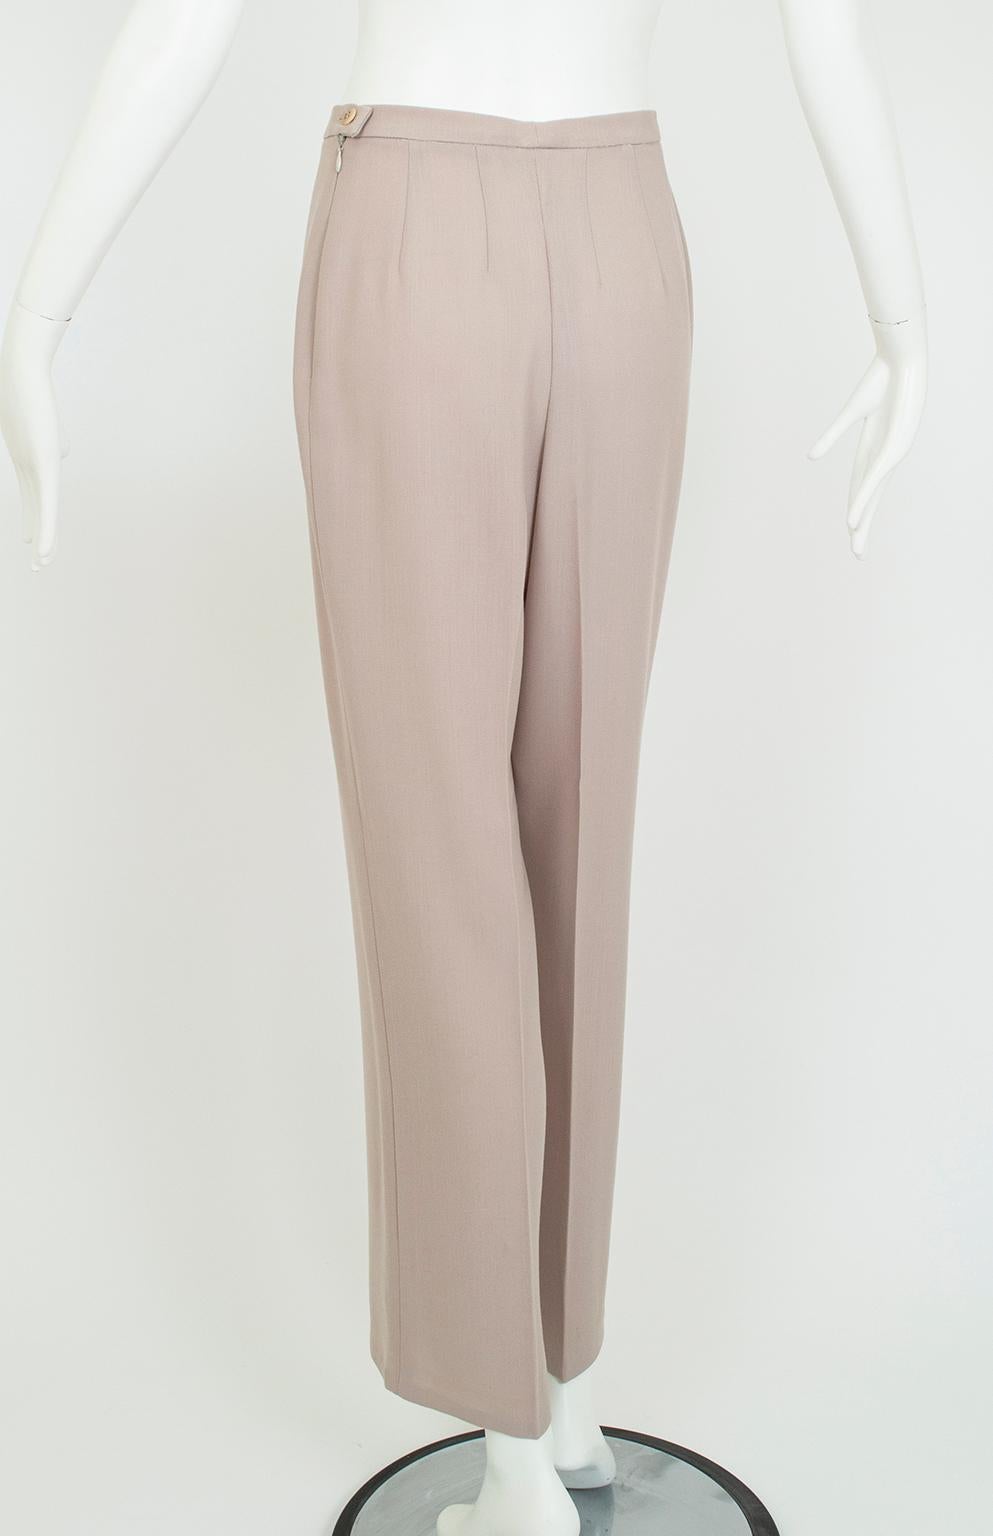 Max Mara Taupe Wool and Silk Crêpe Belted Pant Suit - It 40 – 42, 1990s For Sale 9